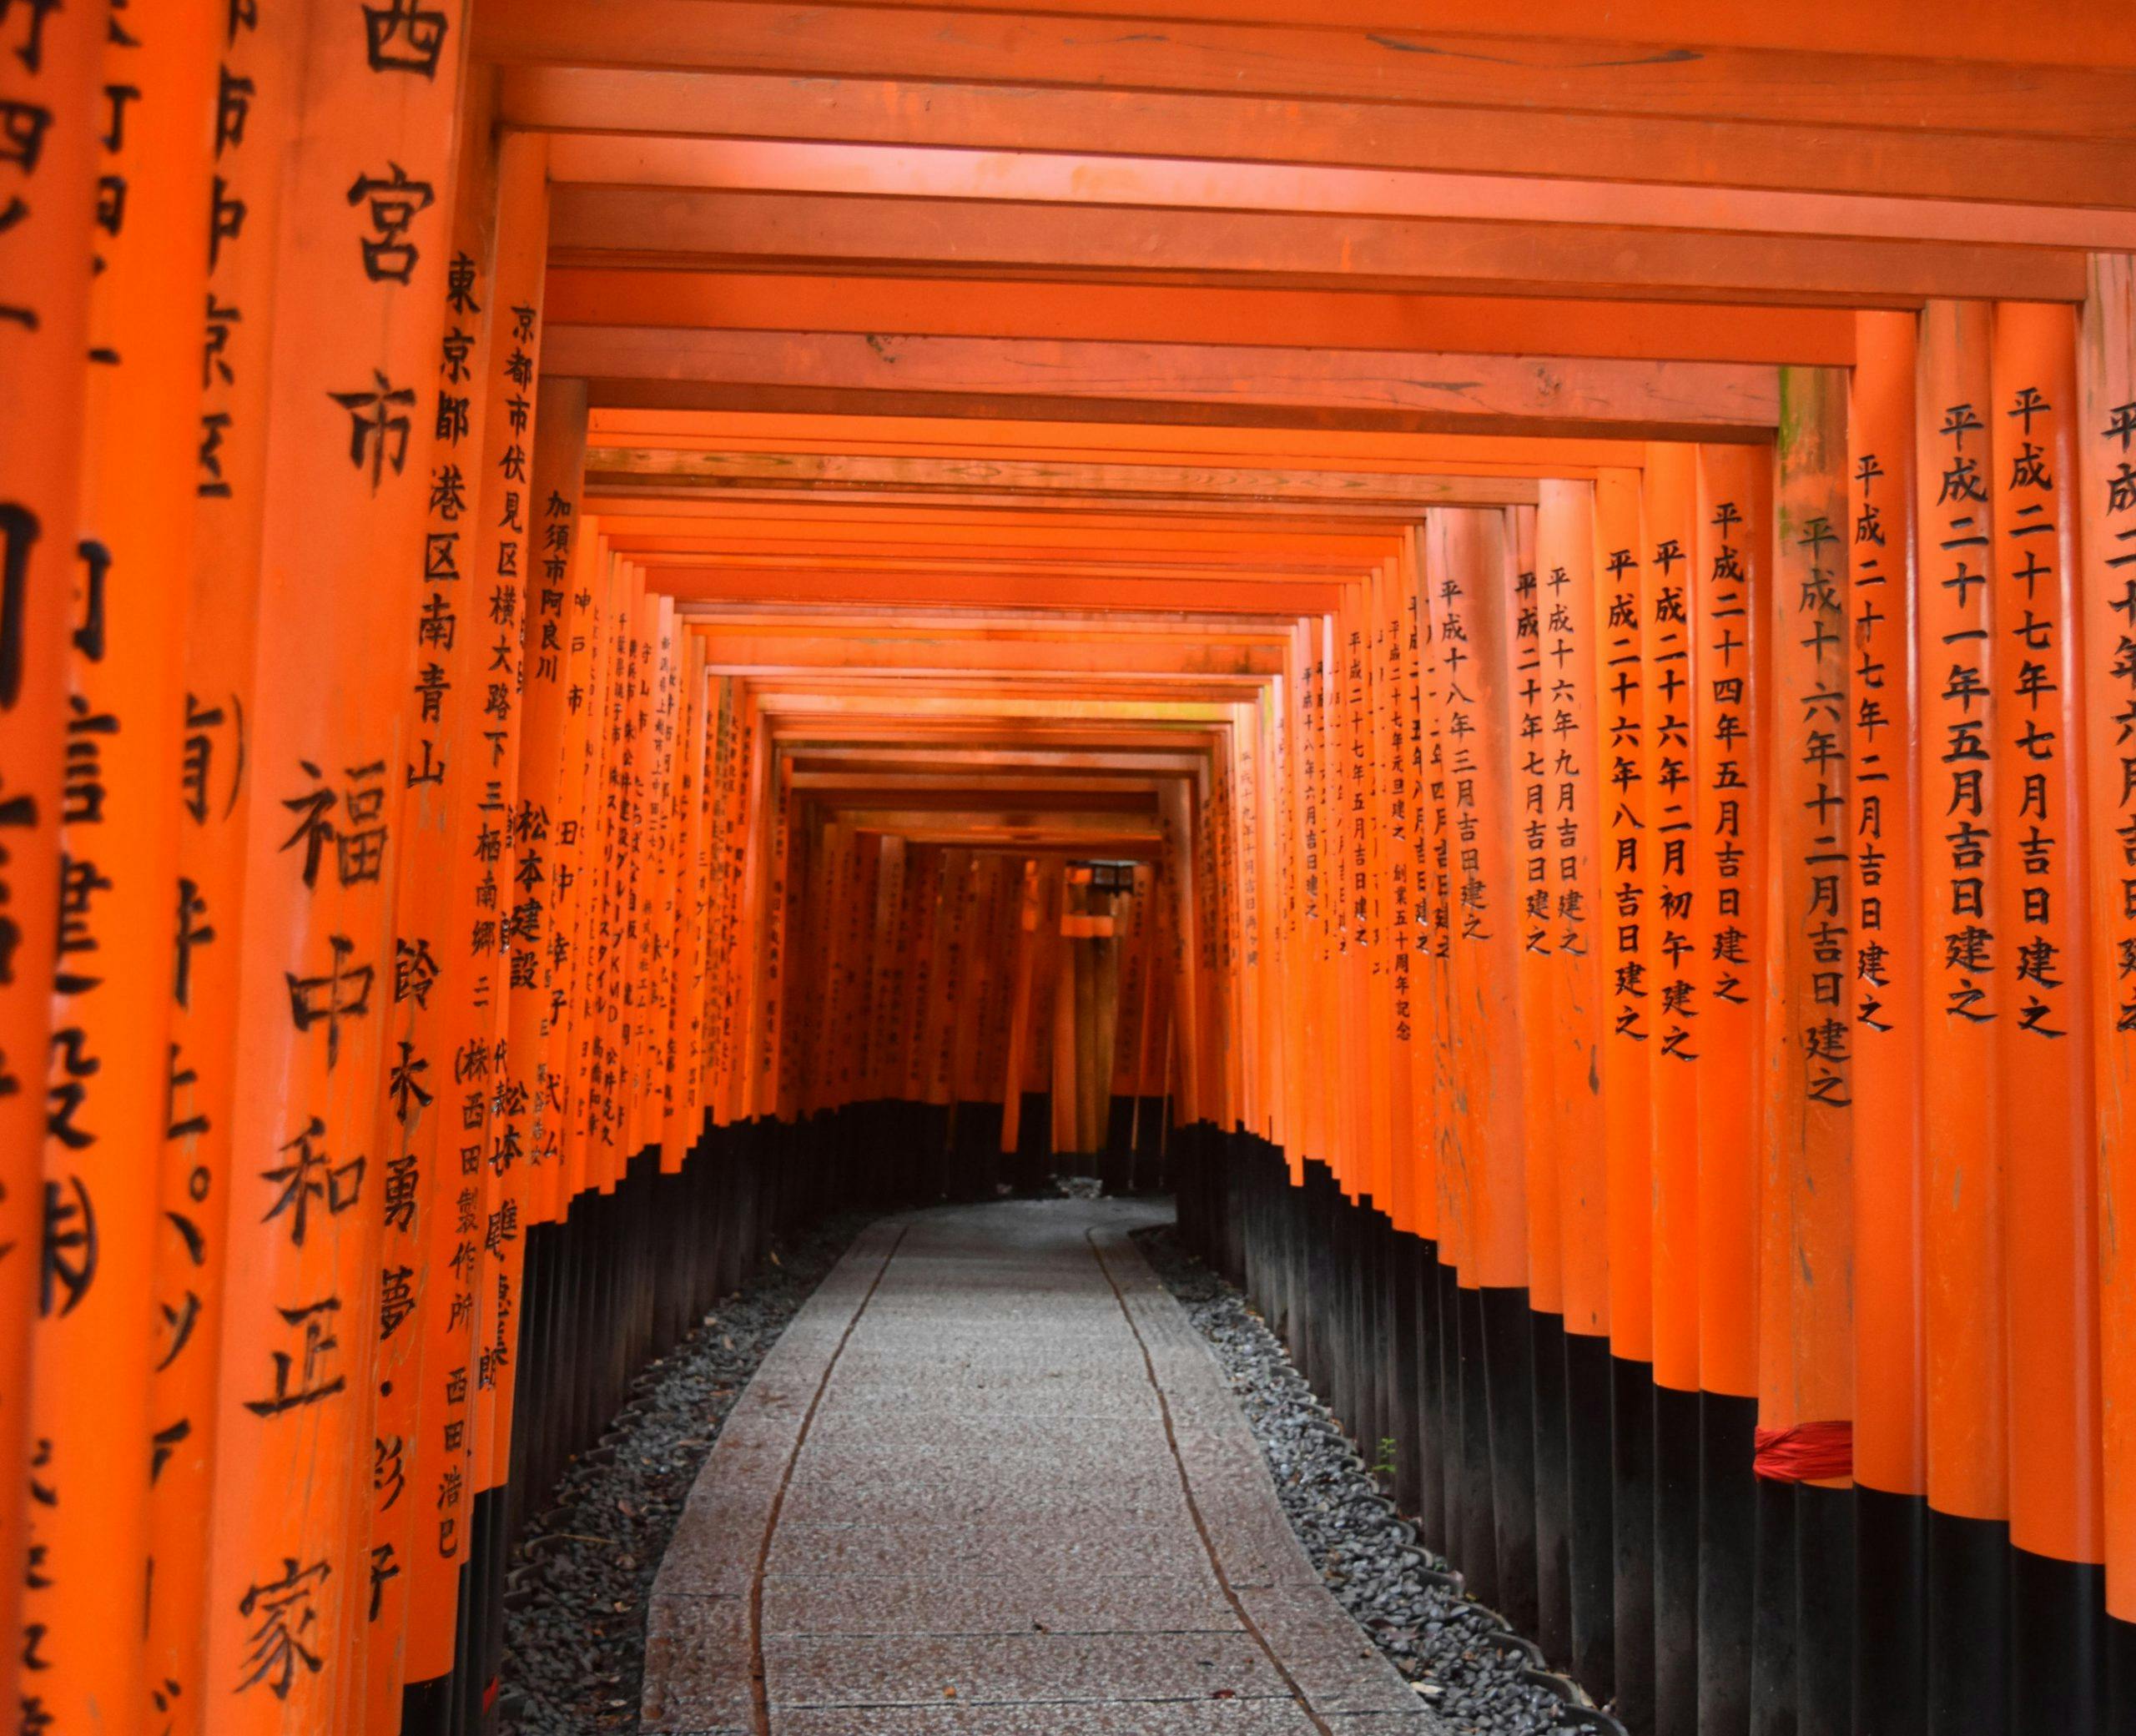 Brige orange gates with Japanese script are pictured. There is a path leading between the gates which continues into the distance